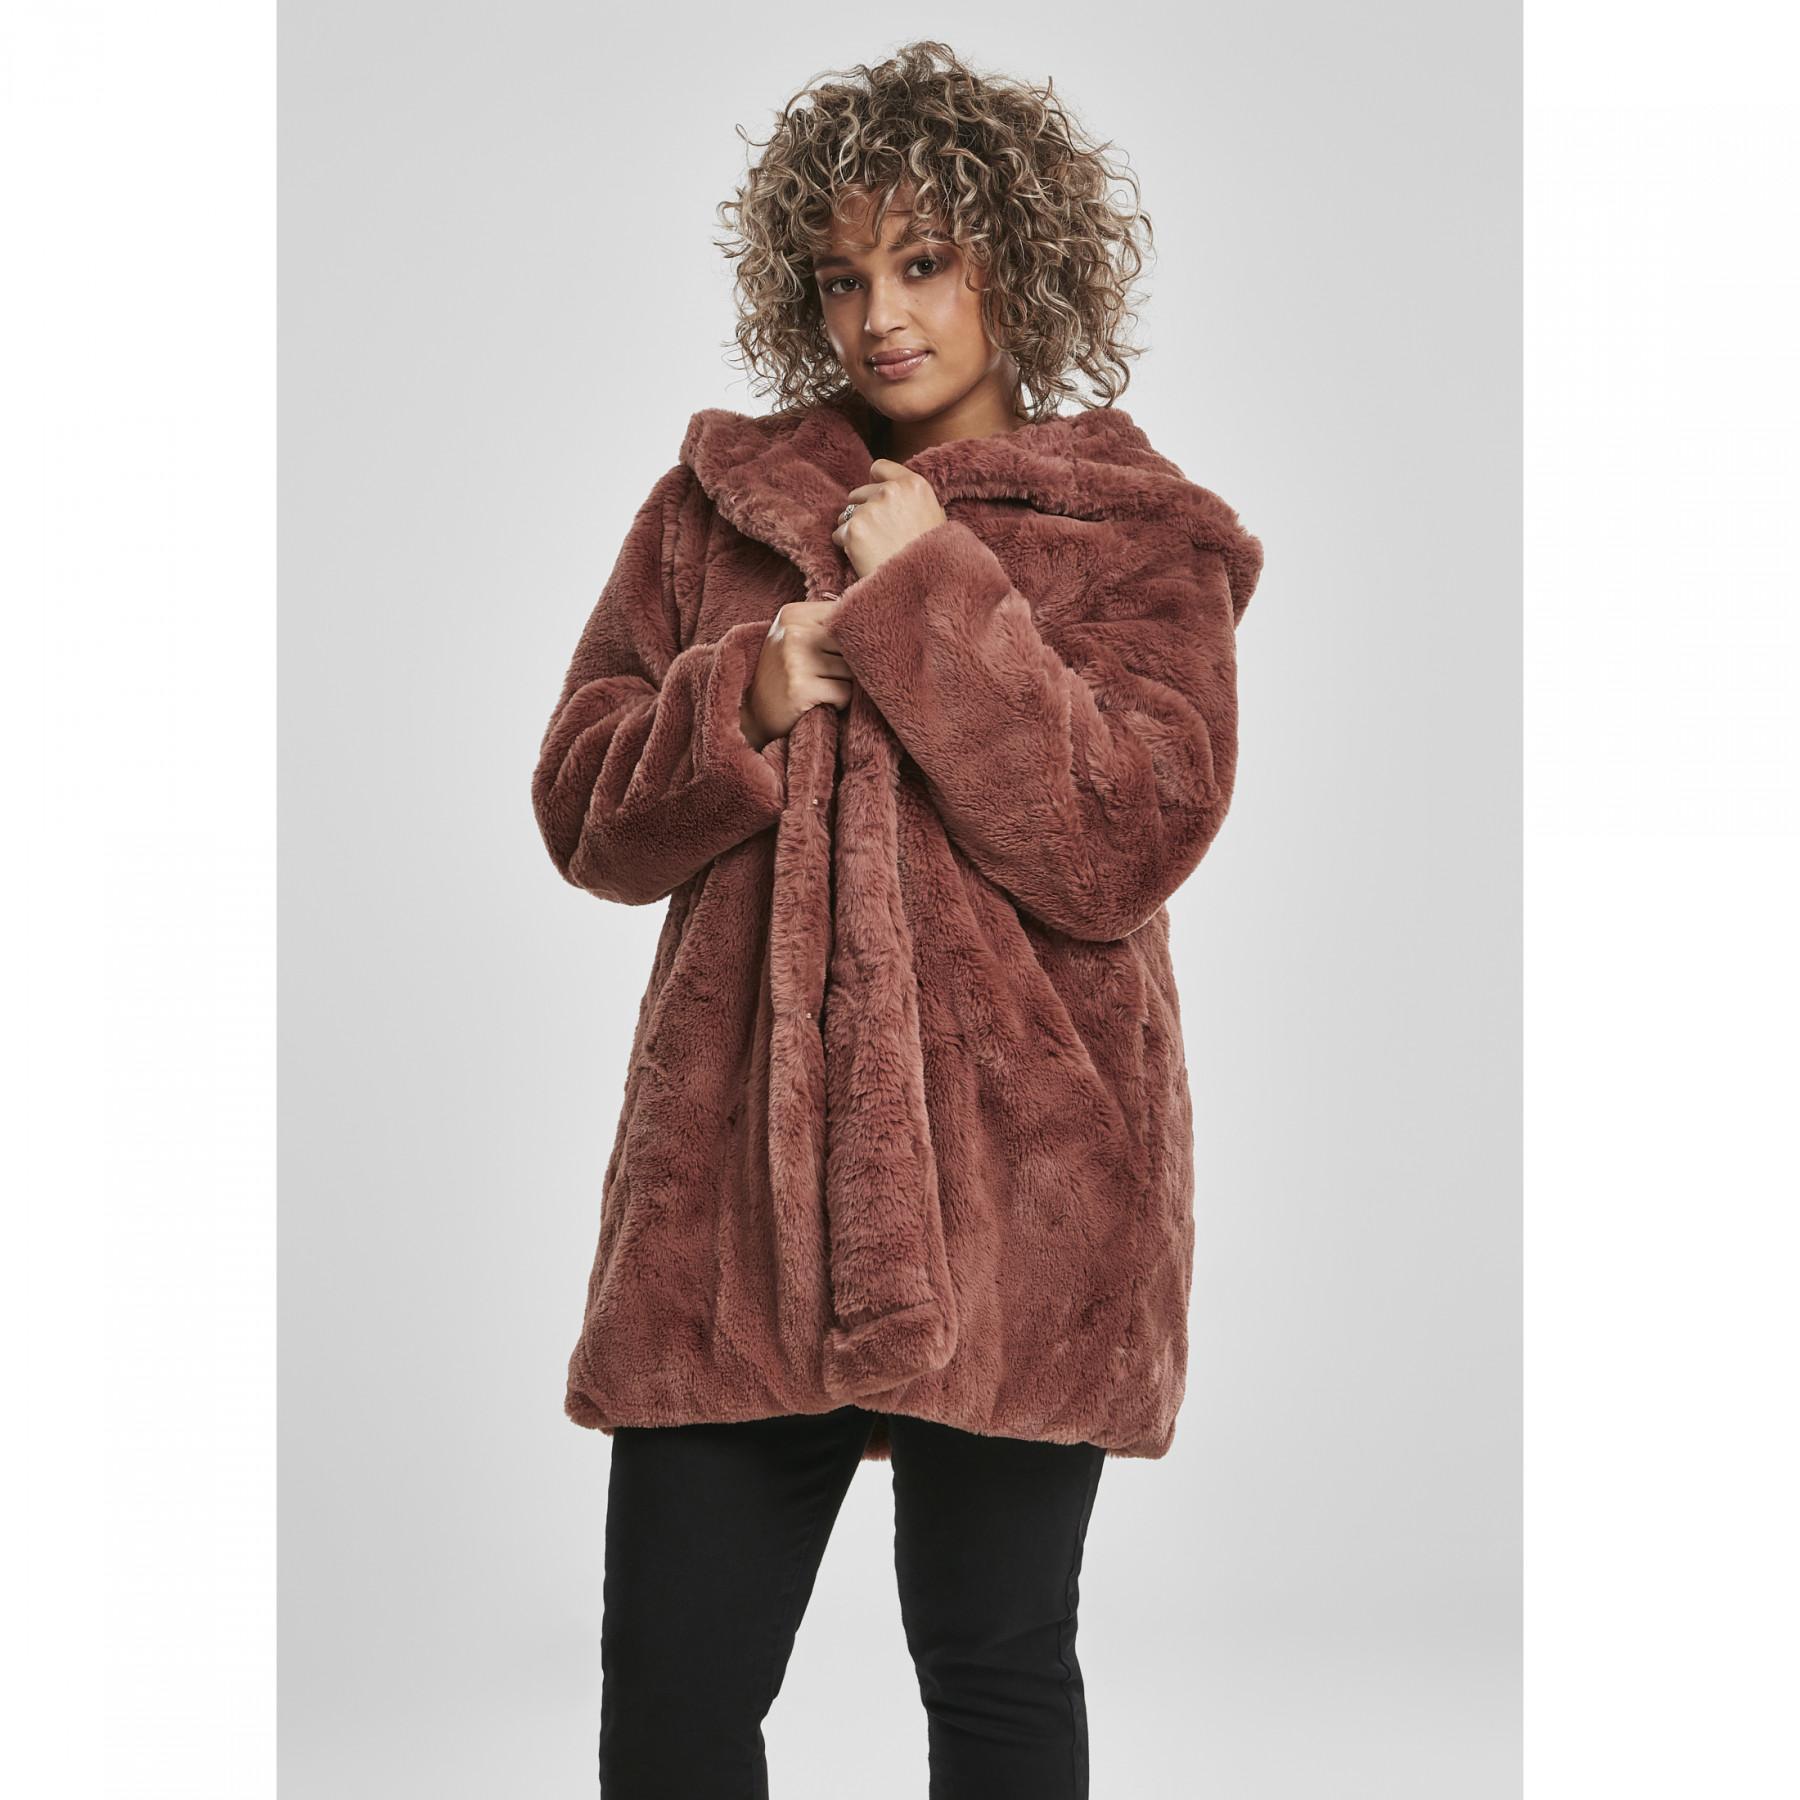 Parka femme grandes tailles Urban Classic hooded teddy coat